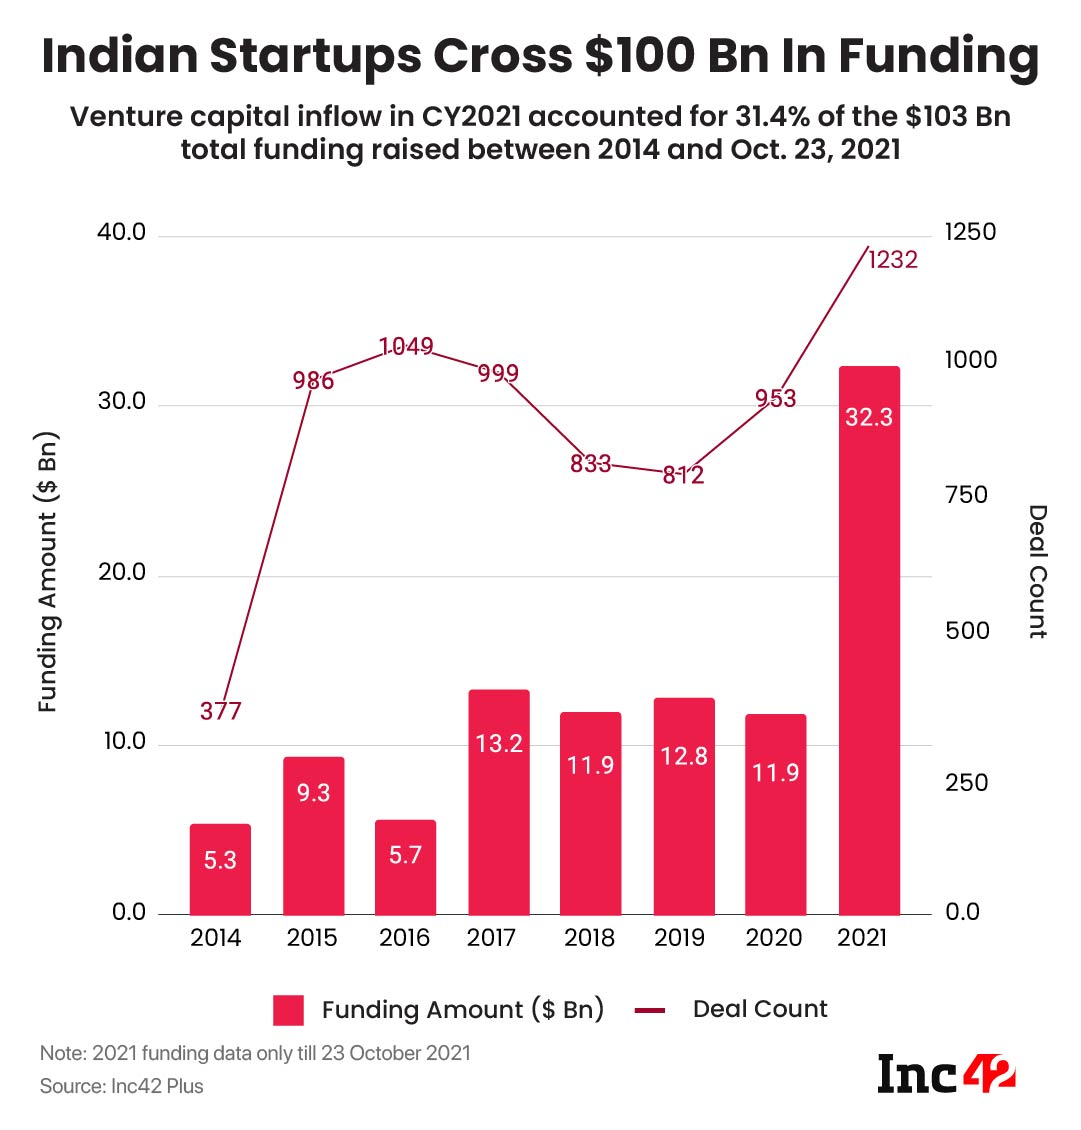 Wohoo! Indian Startups Have Raised $100 Bn Since 2014